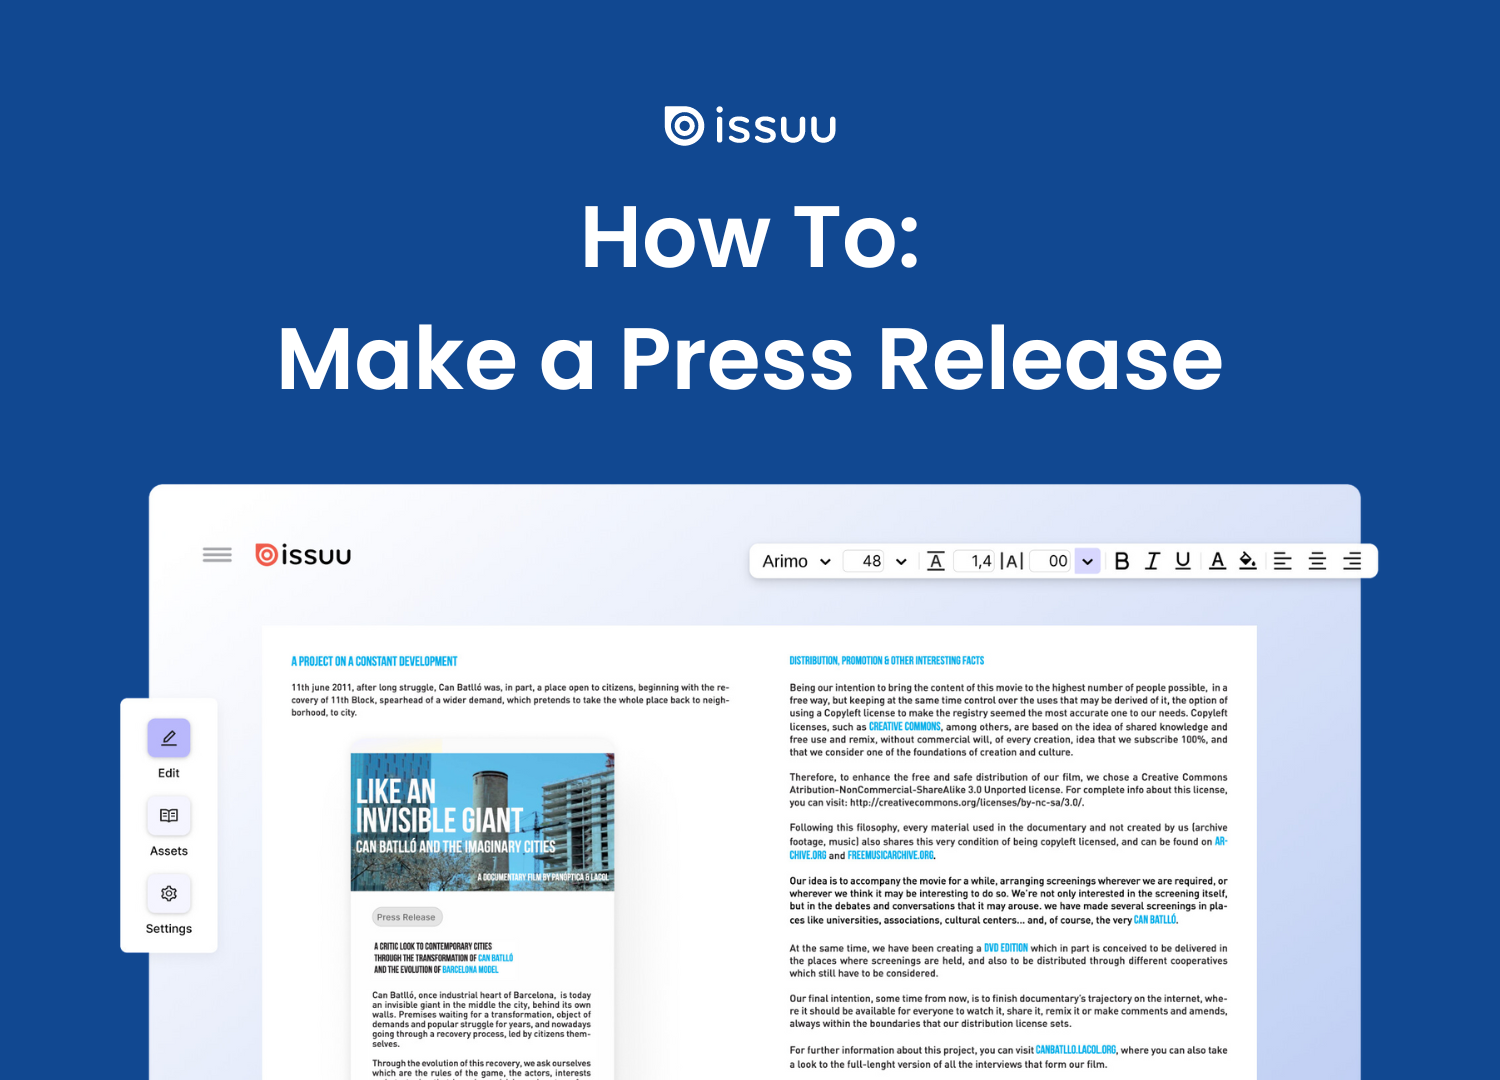 How to Make a Press Release on. blue background with a digital press release under the text